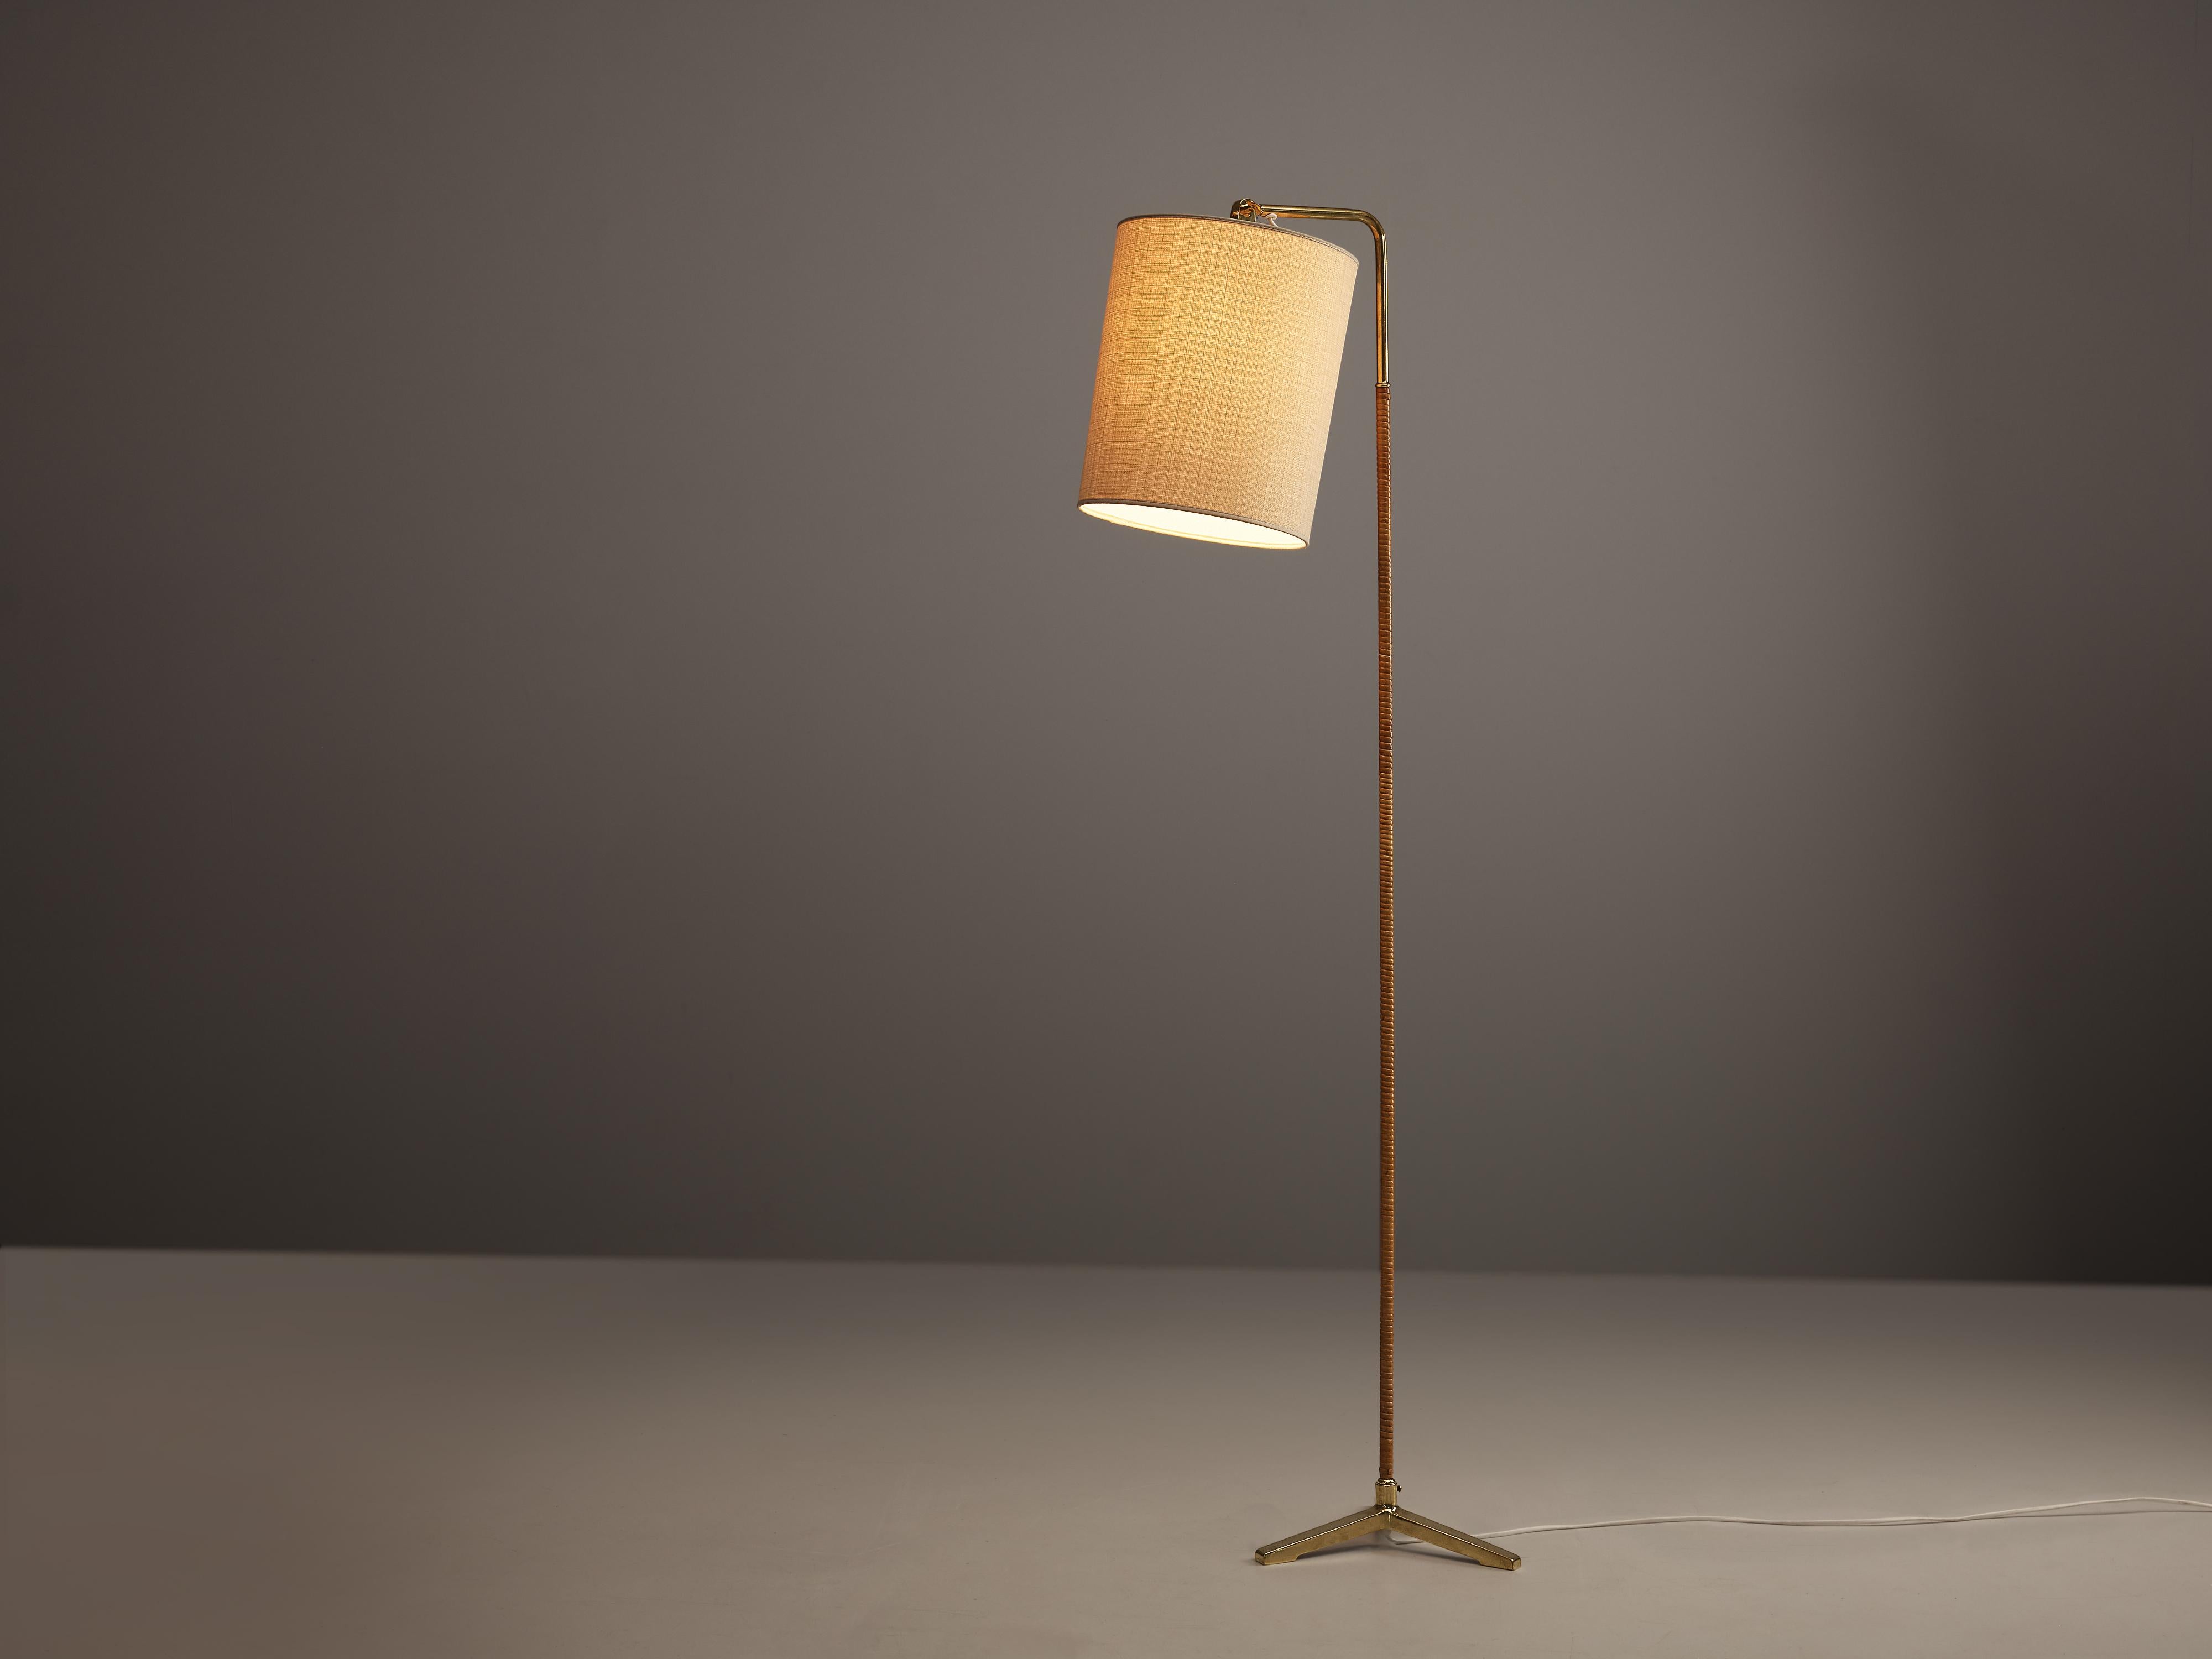 Paavo Tynell for Taito, floor lamp model 9631, brass, cane, cloth, Finland, 1950s

Elegant floor lamp by Finish master of lights Paavo Tynell. This admirable floor lamp stands on a delicate tripod in brass from which a thin stem with a cane surface